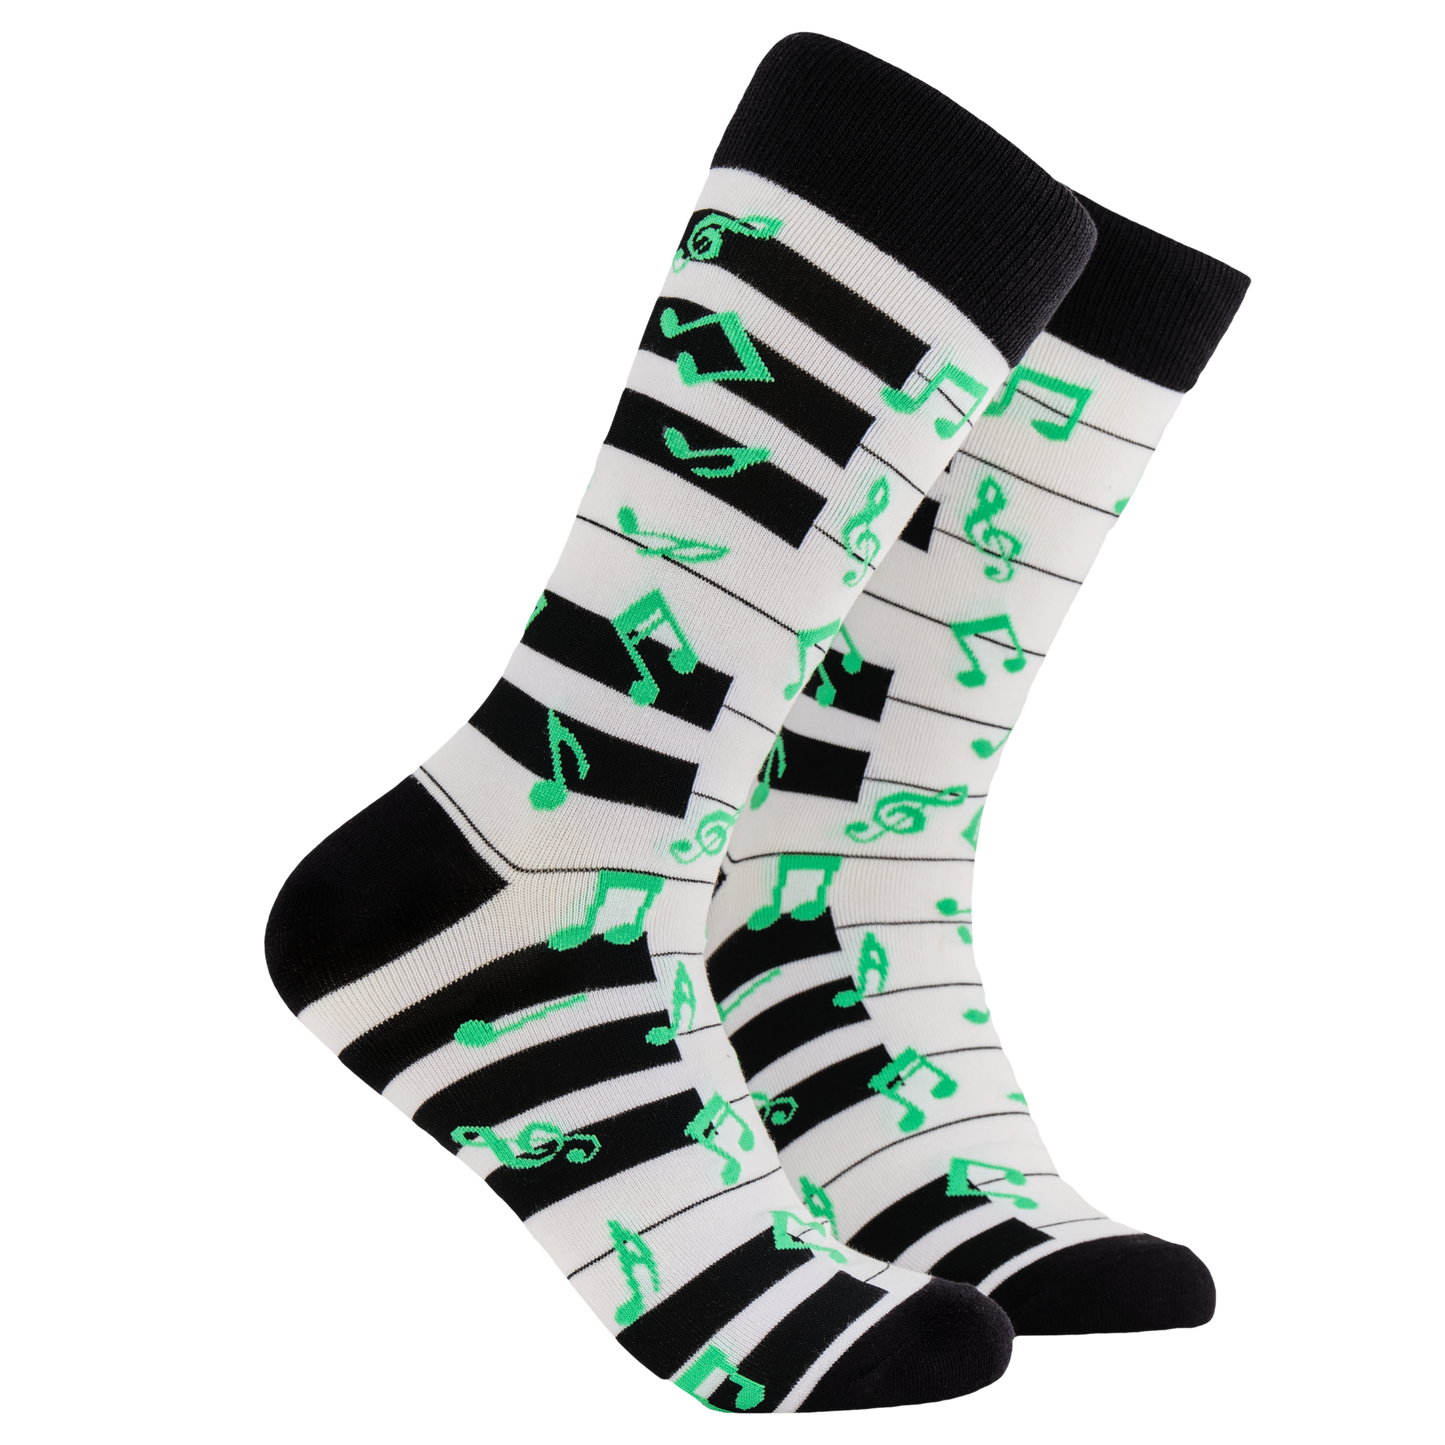 Piano Socks. A pair of socks depicting a piano keyboard and green music notes. Black and white piano legs, black cuff, heel and toe.